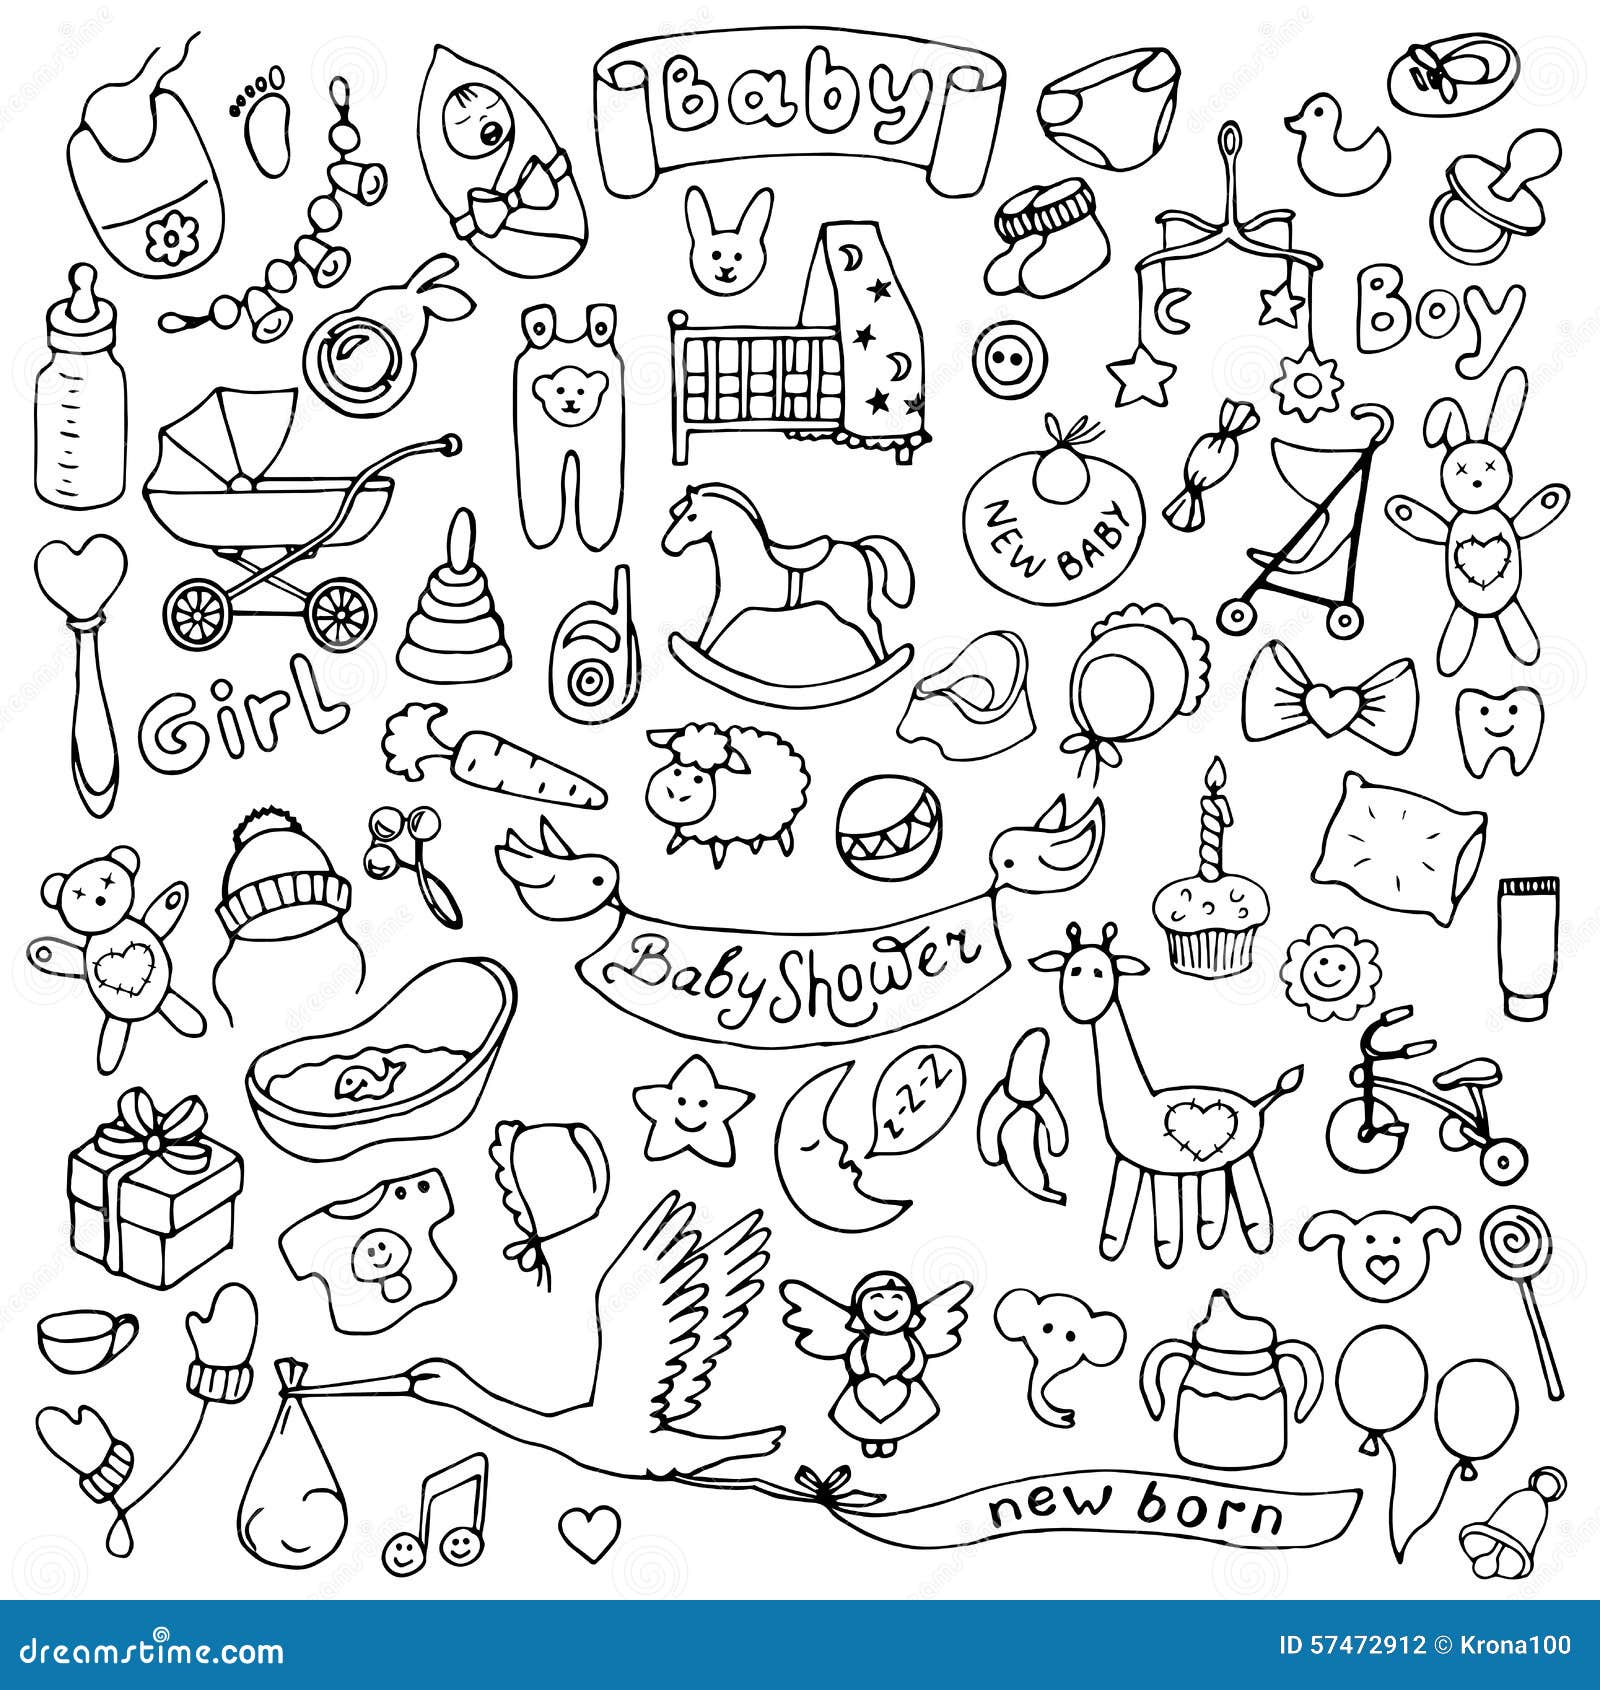 Baby hand drawn doodle set stock vector. Illustration of crib - 57472912